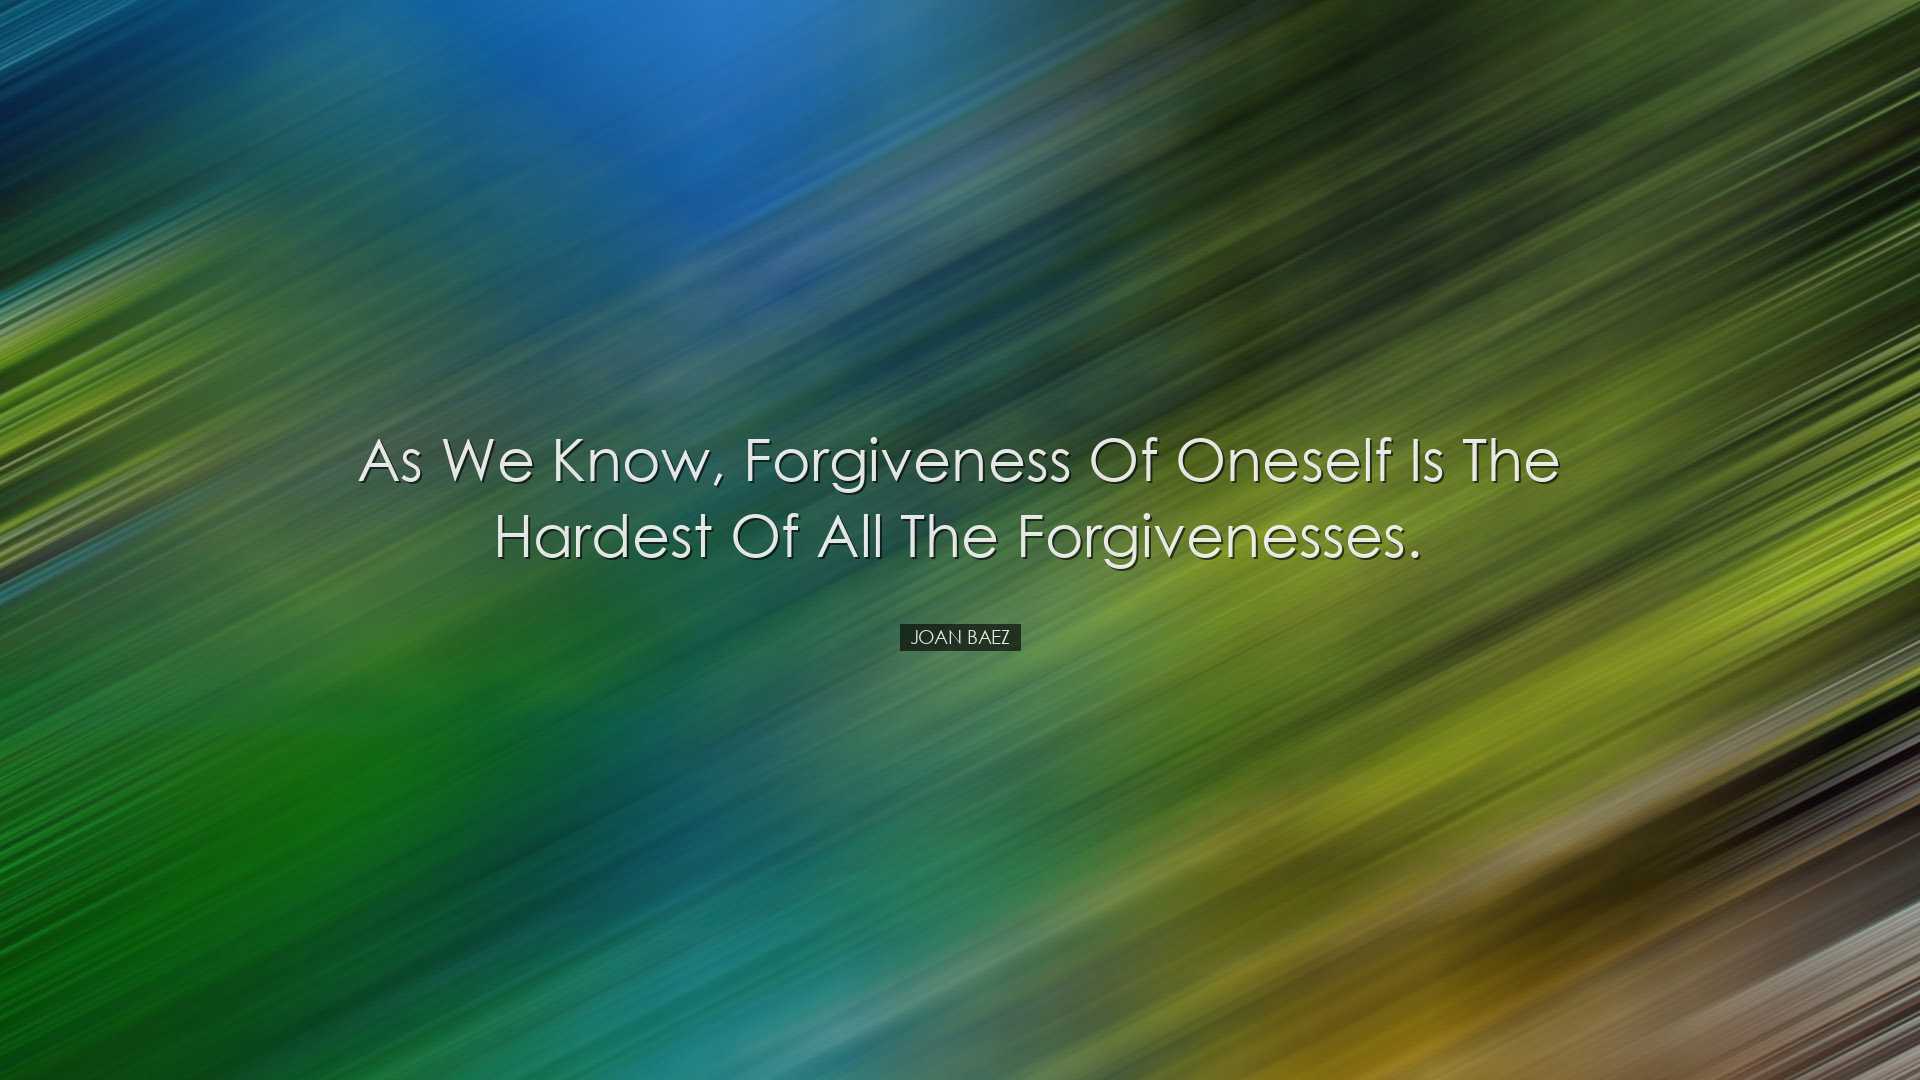 As we know, forgiveness of oneself is the hardest of all the forgi